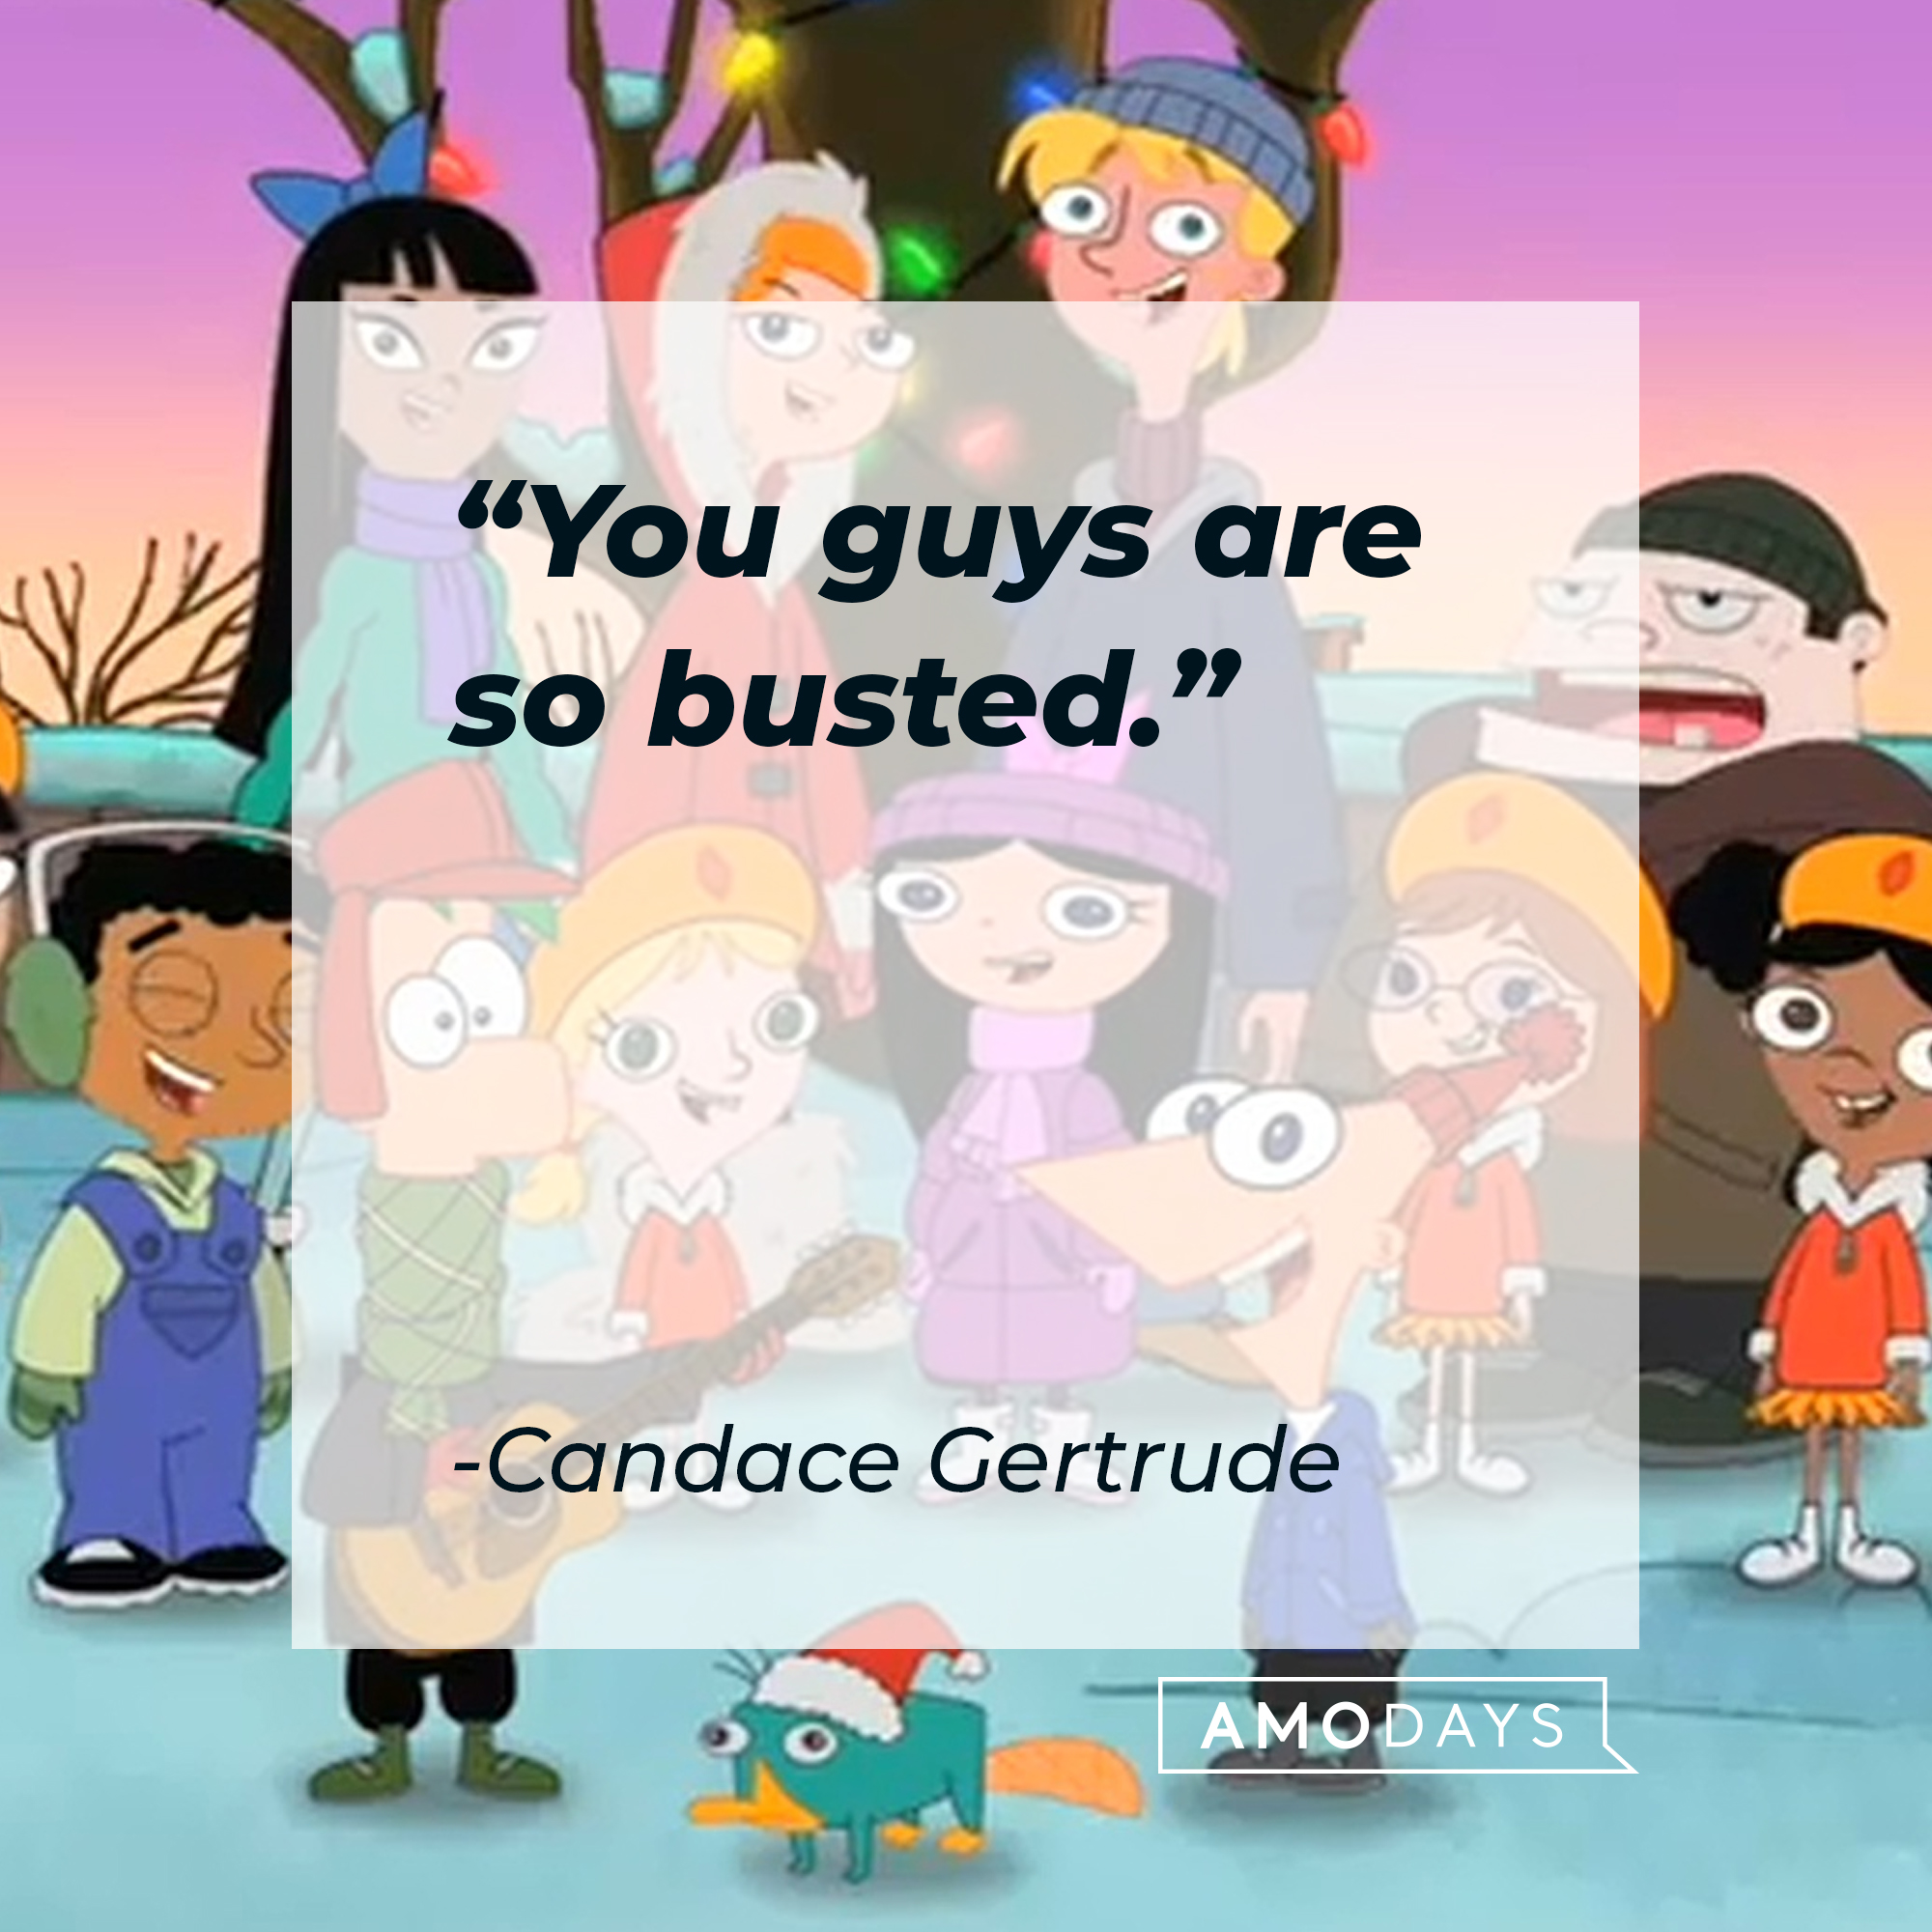 Candace Gertrude's quote: "You guys are so busted." | Source: facebook.com/Phineas-and-Ferb